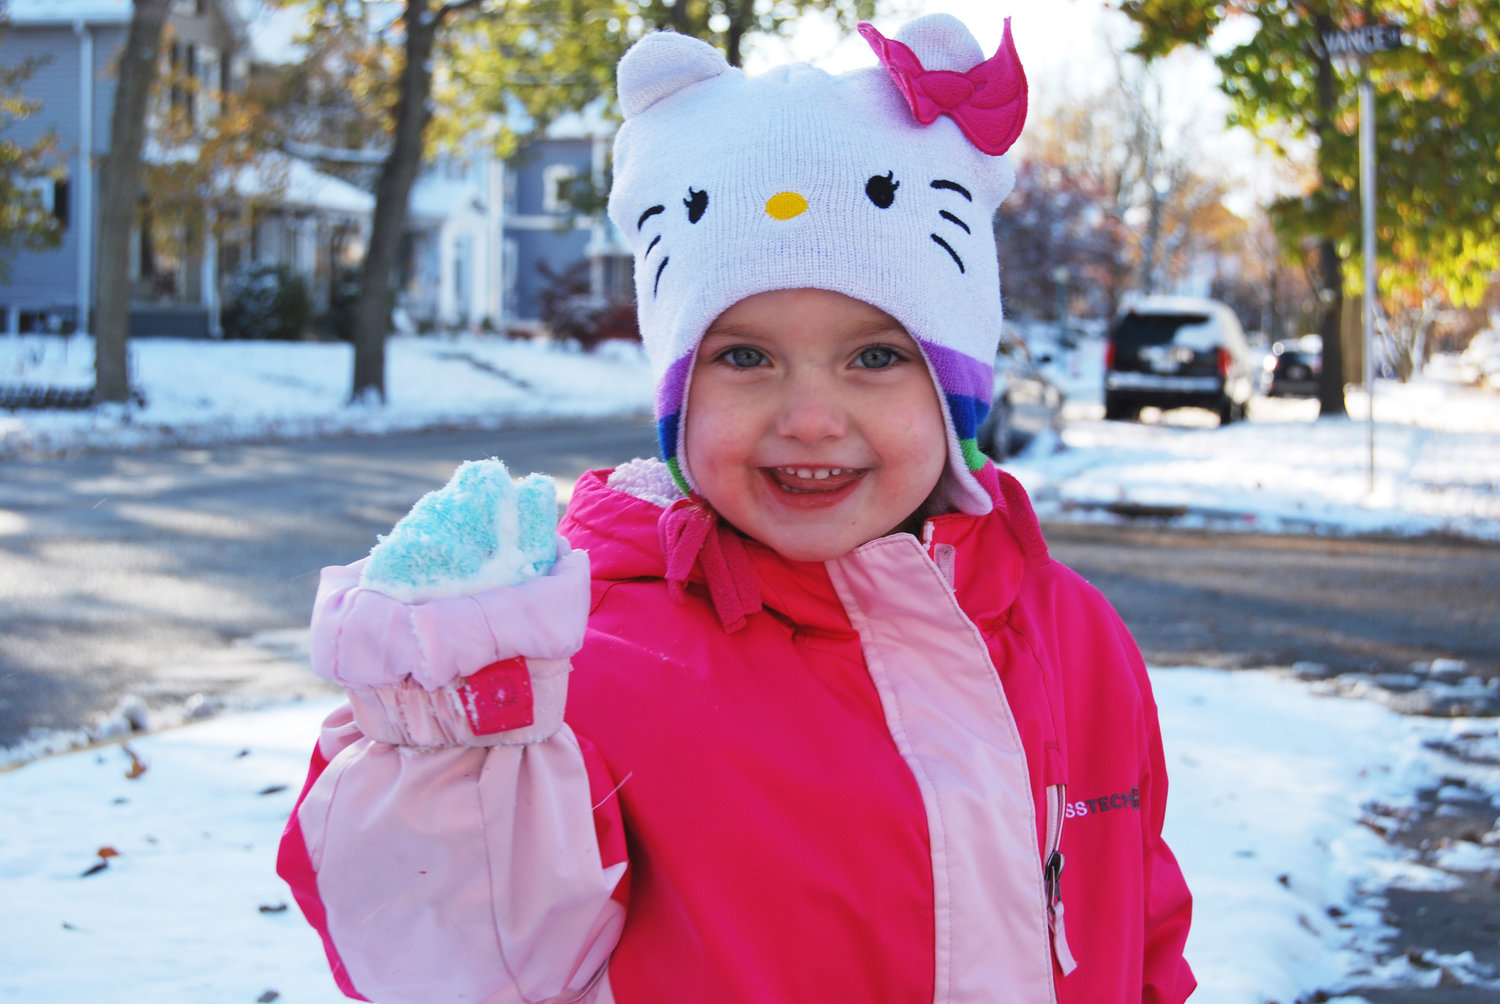 Clara Brown was outside Tuesday afternoon enjoying the first snowfall of the season. She was making and throwing snowballs at those passing by.